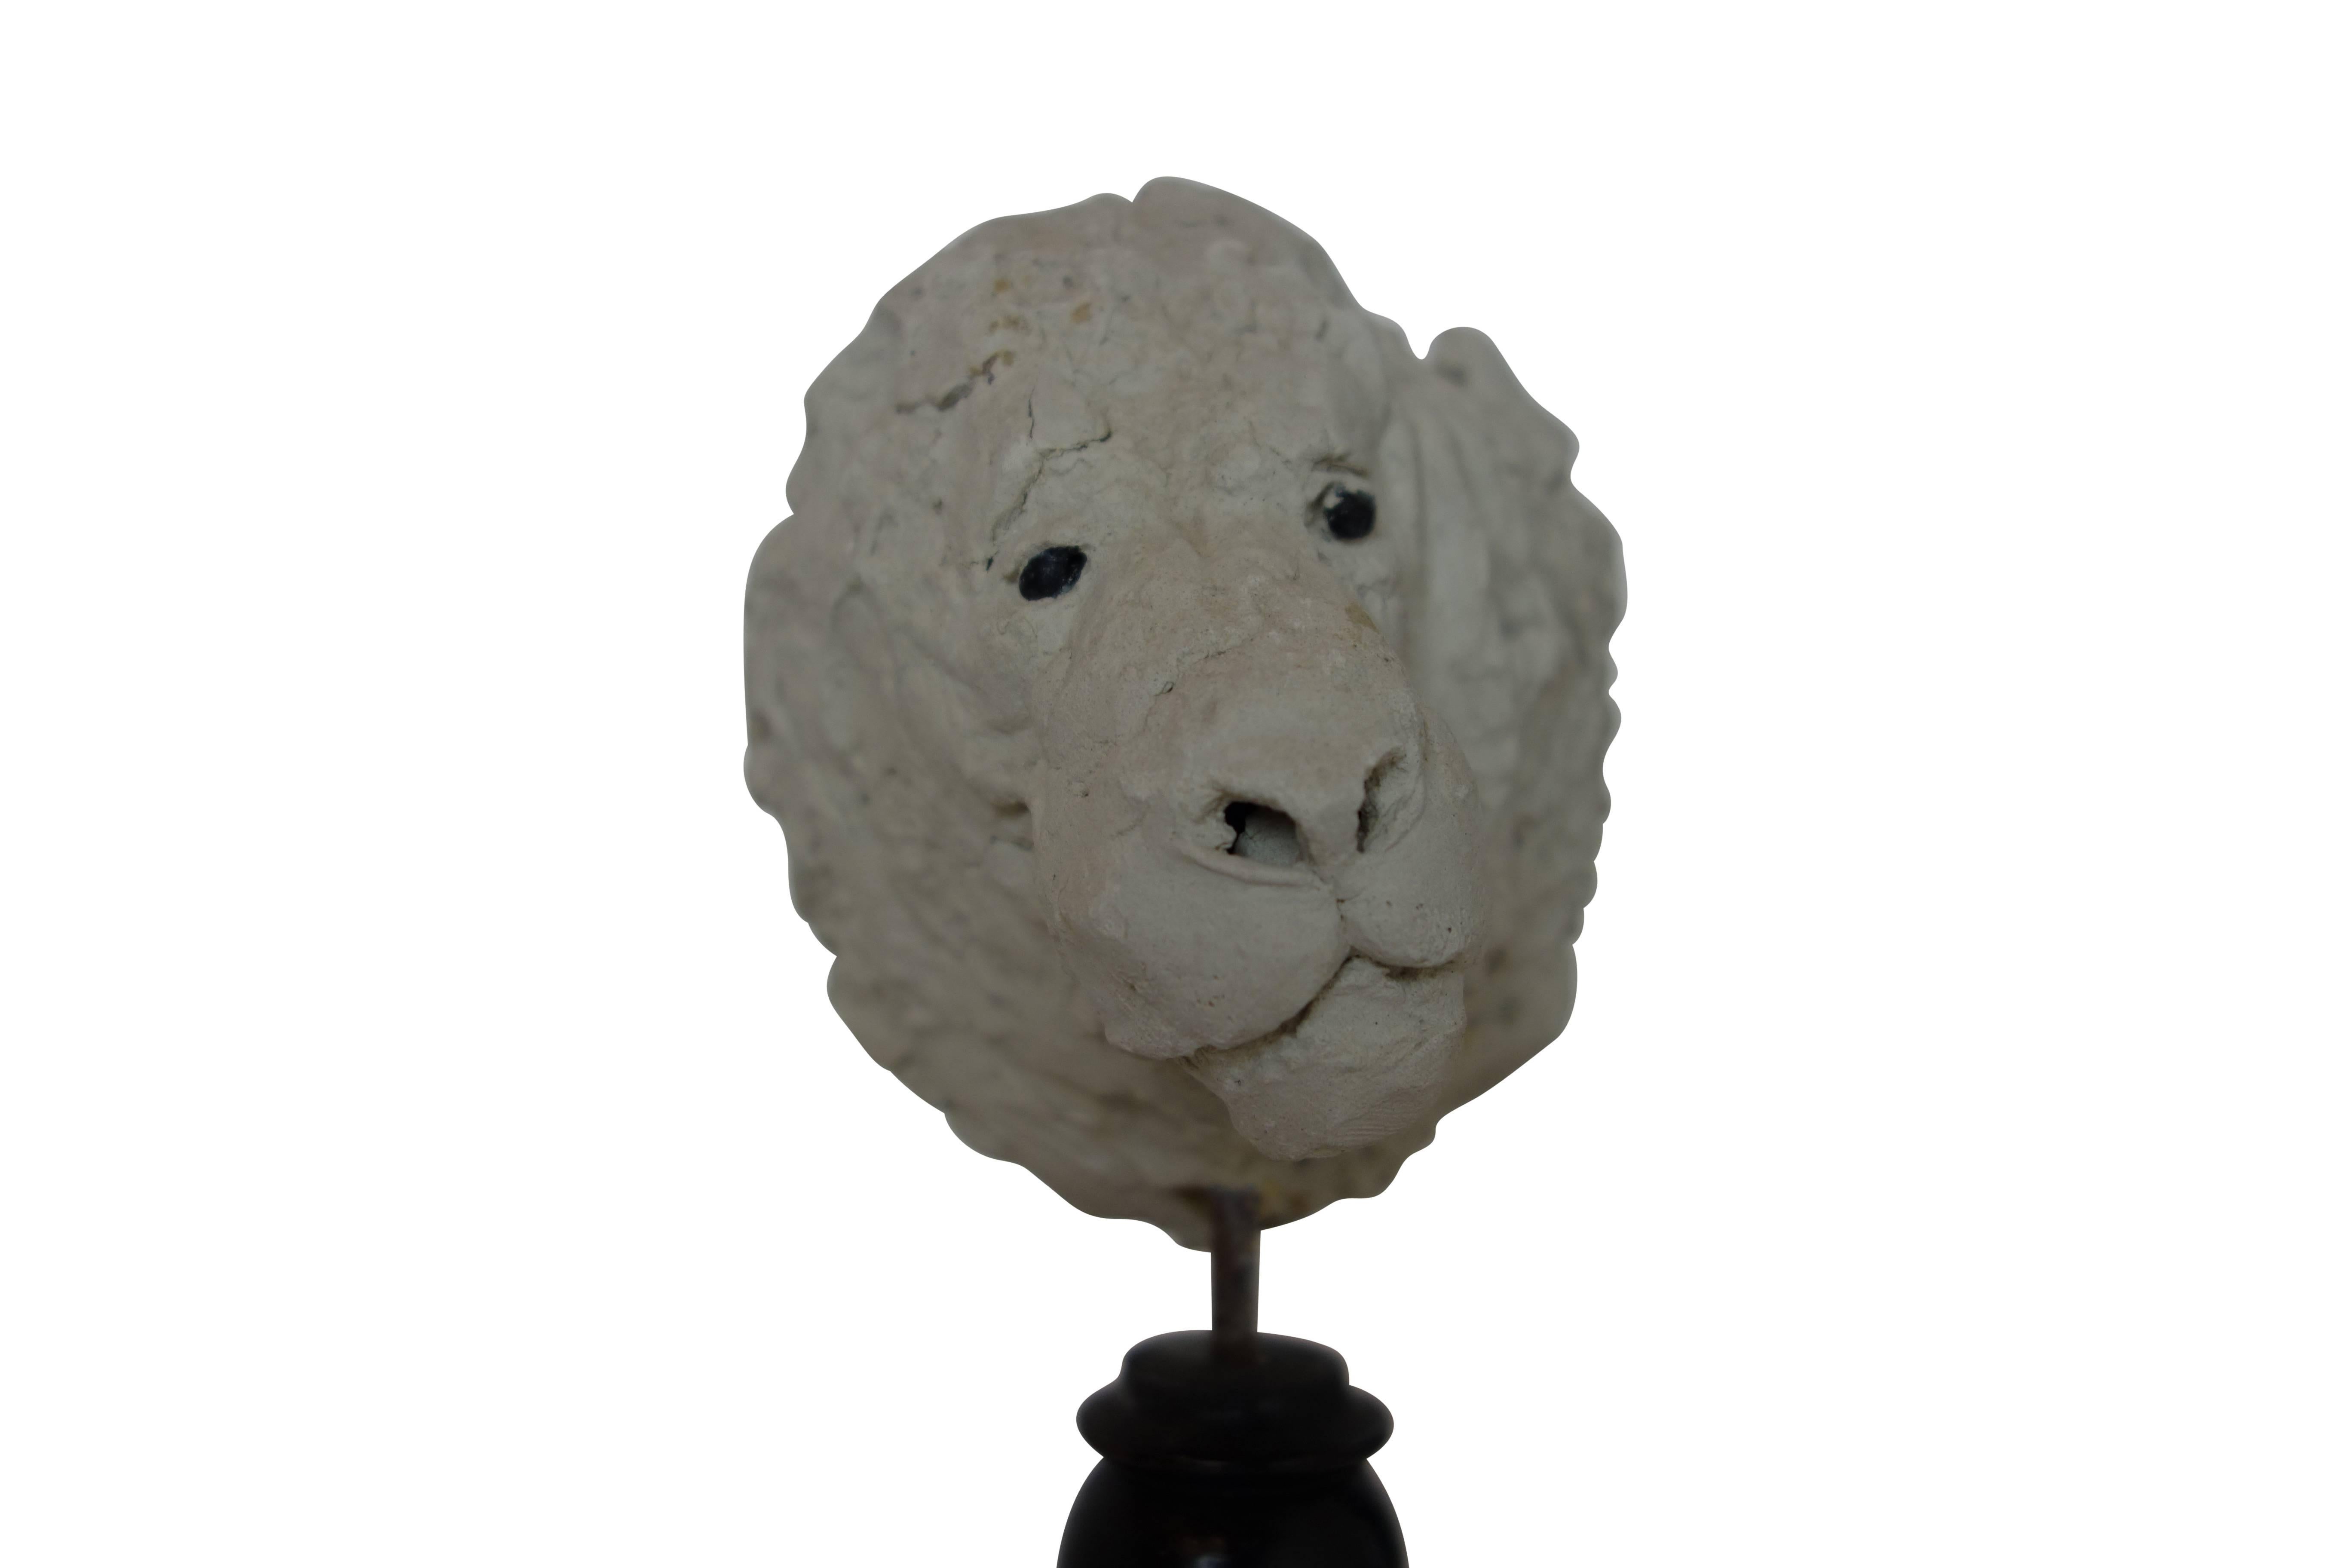 This is an expressive 19th century plaster lion head sculpture mounted on a beautiful turned wood stand.